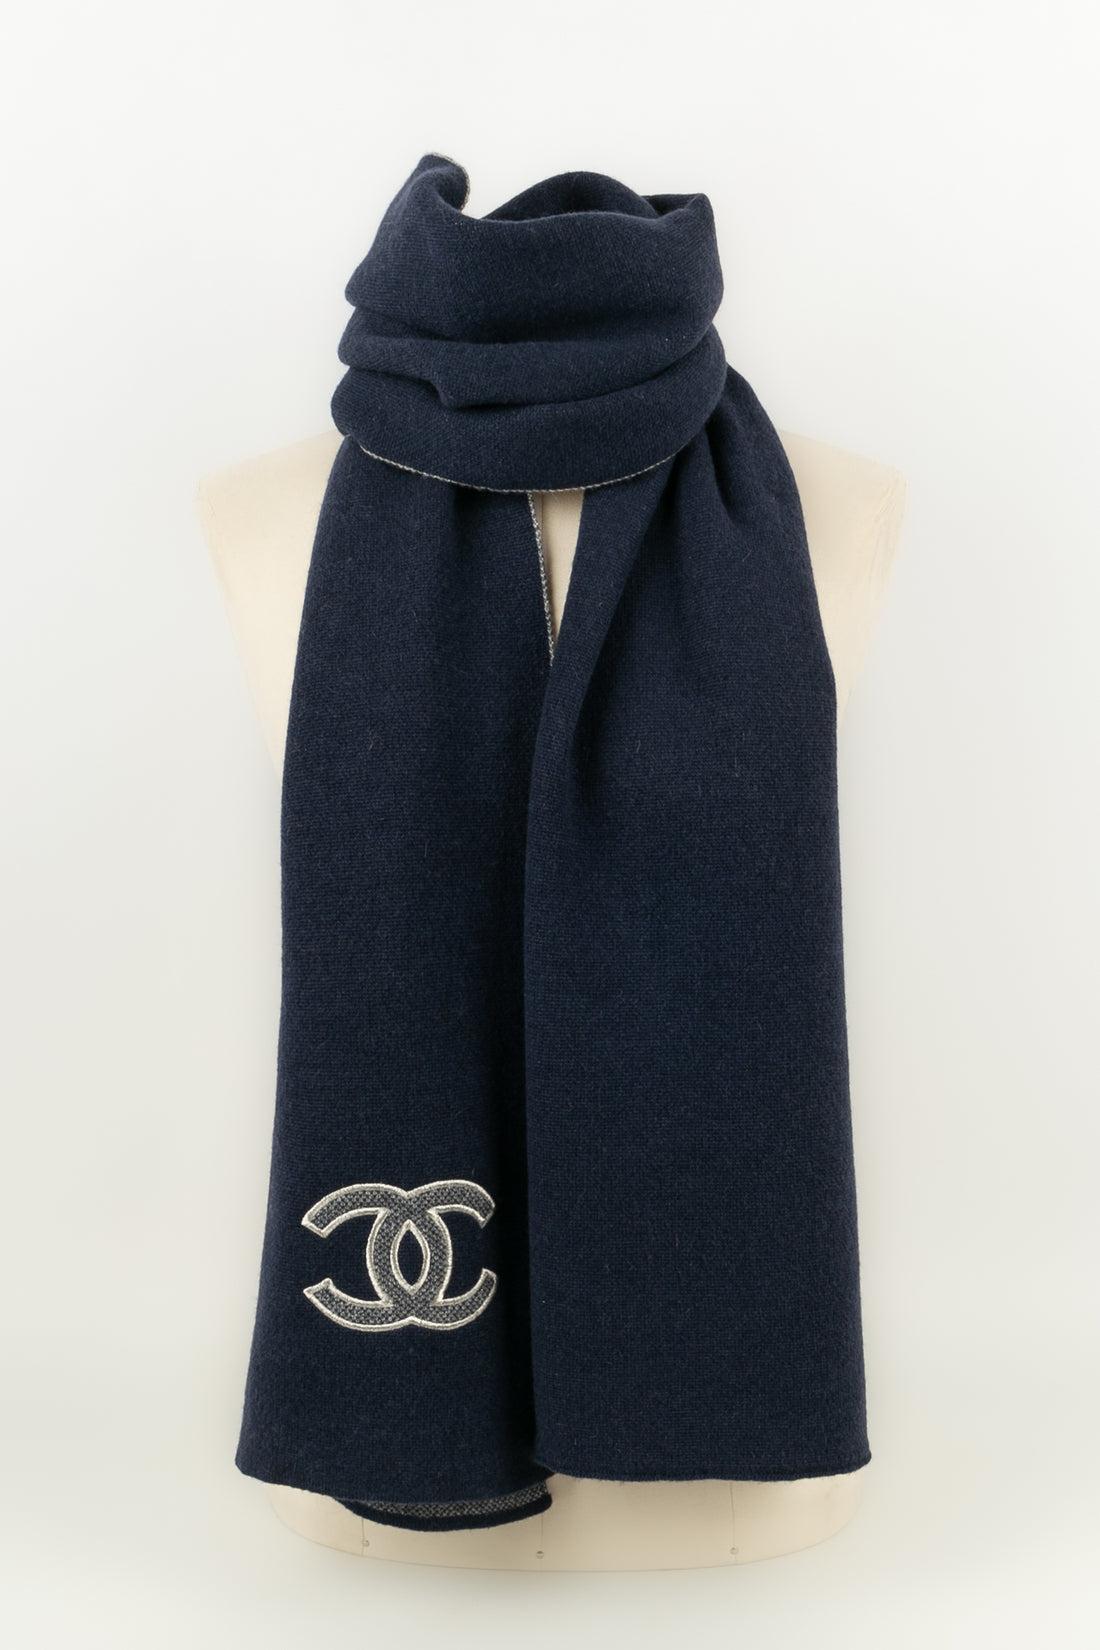 Chanel - Winter set composed of a scarf, a hat, and a pair of gloves, in cashmere and wool. The composition label was unstitched.

Additional information: 
Dimensions: Single-size
Condition: Very good condition
Seller Ref number: ACC67